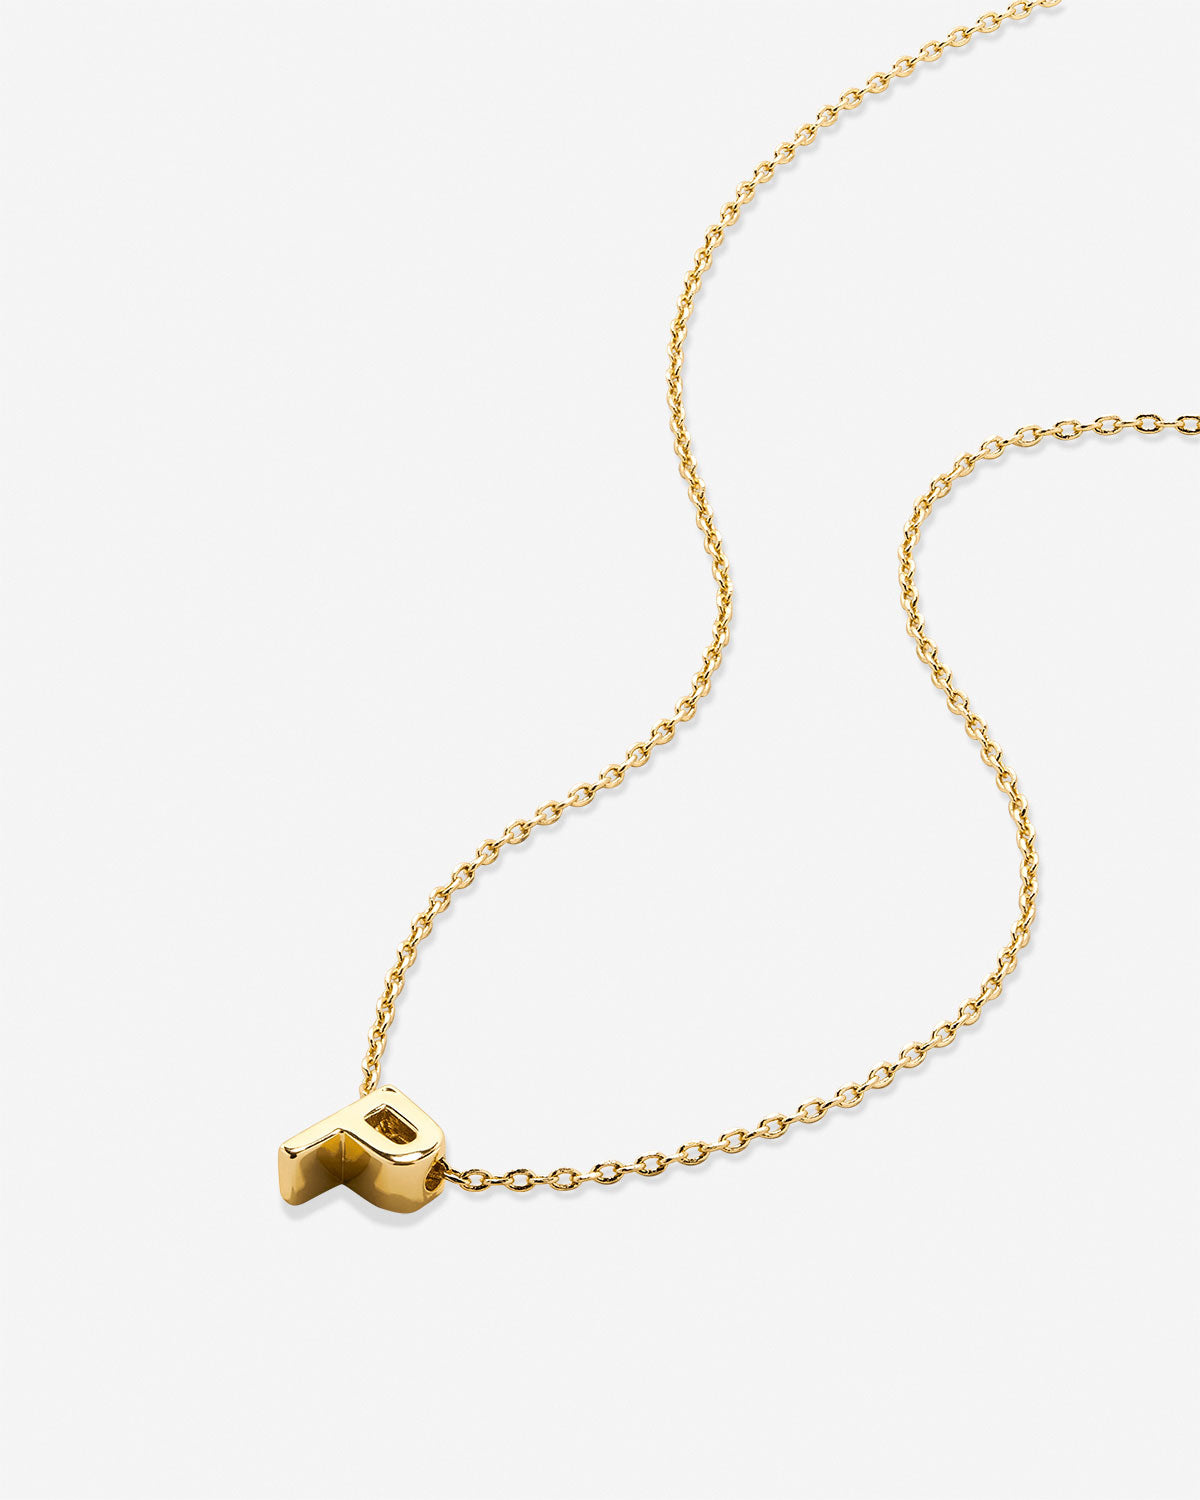 Just For You Initial Necklace — Letter P